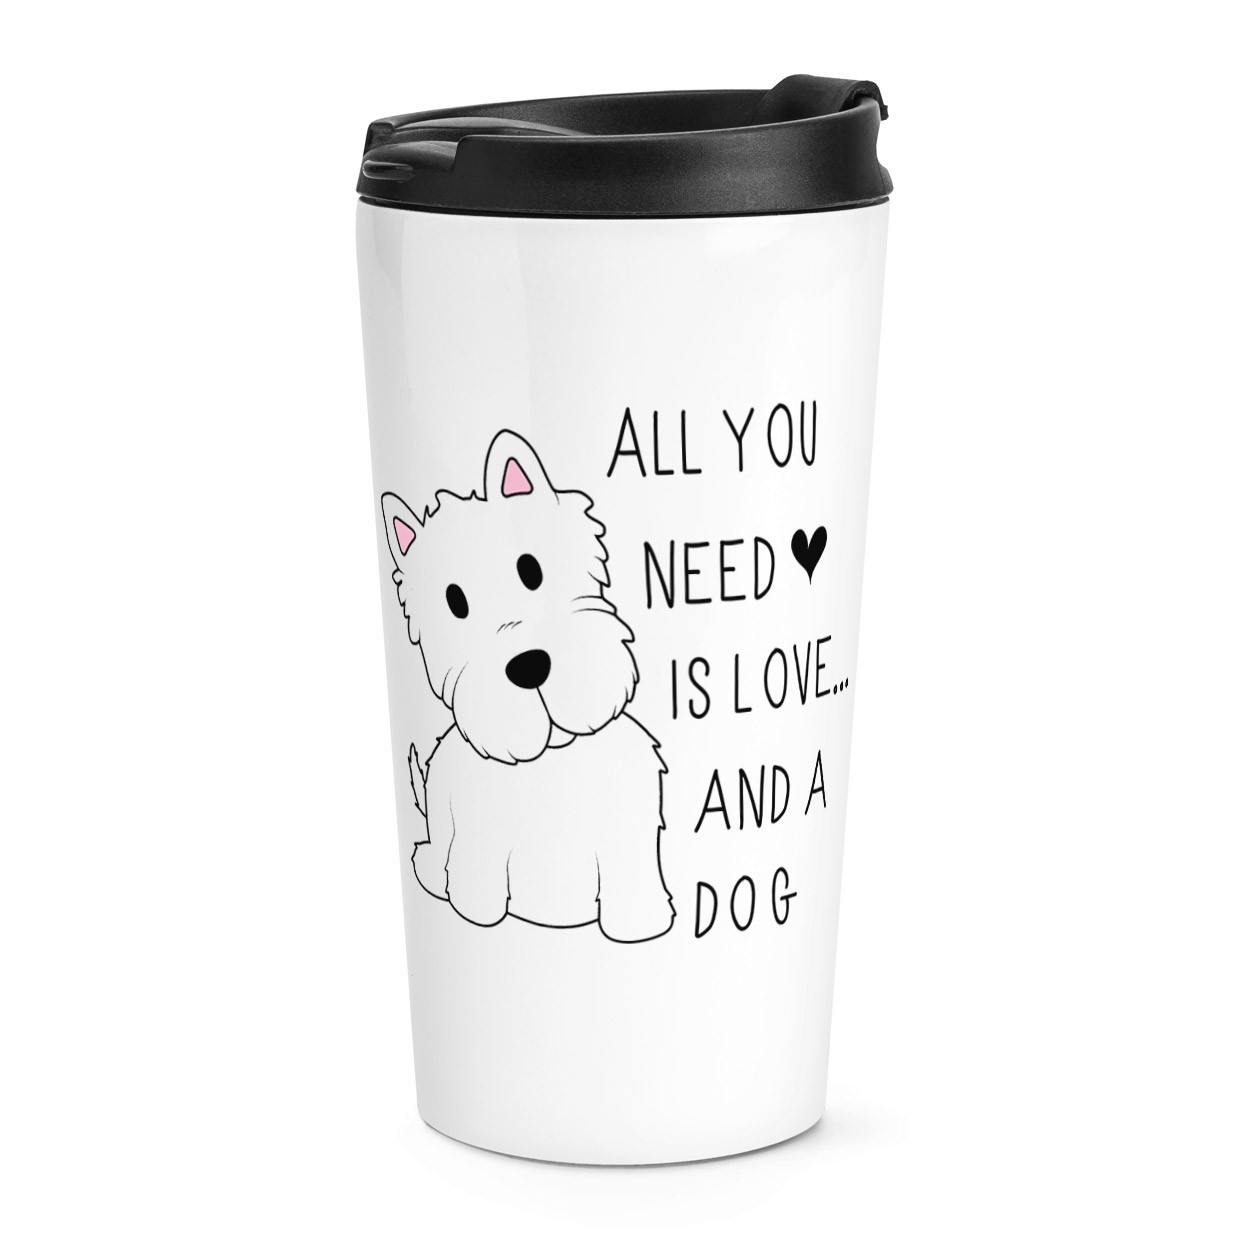 All You Need Is Love And A Dog Travel Mug Cup